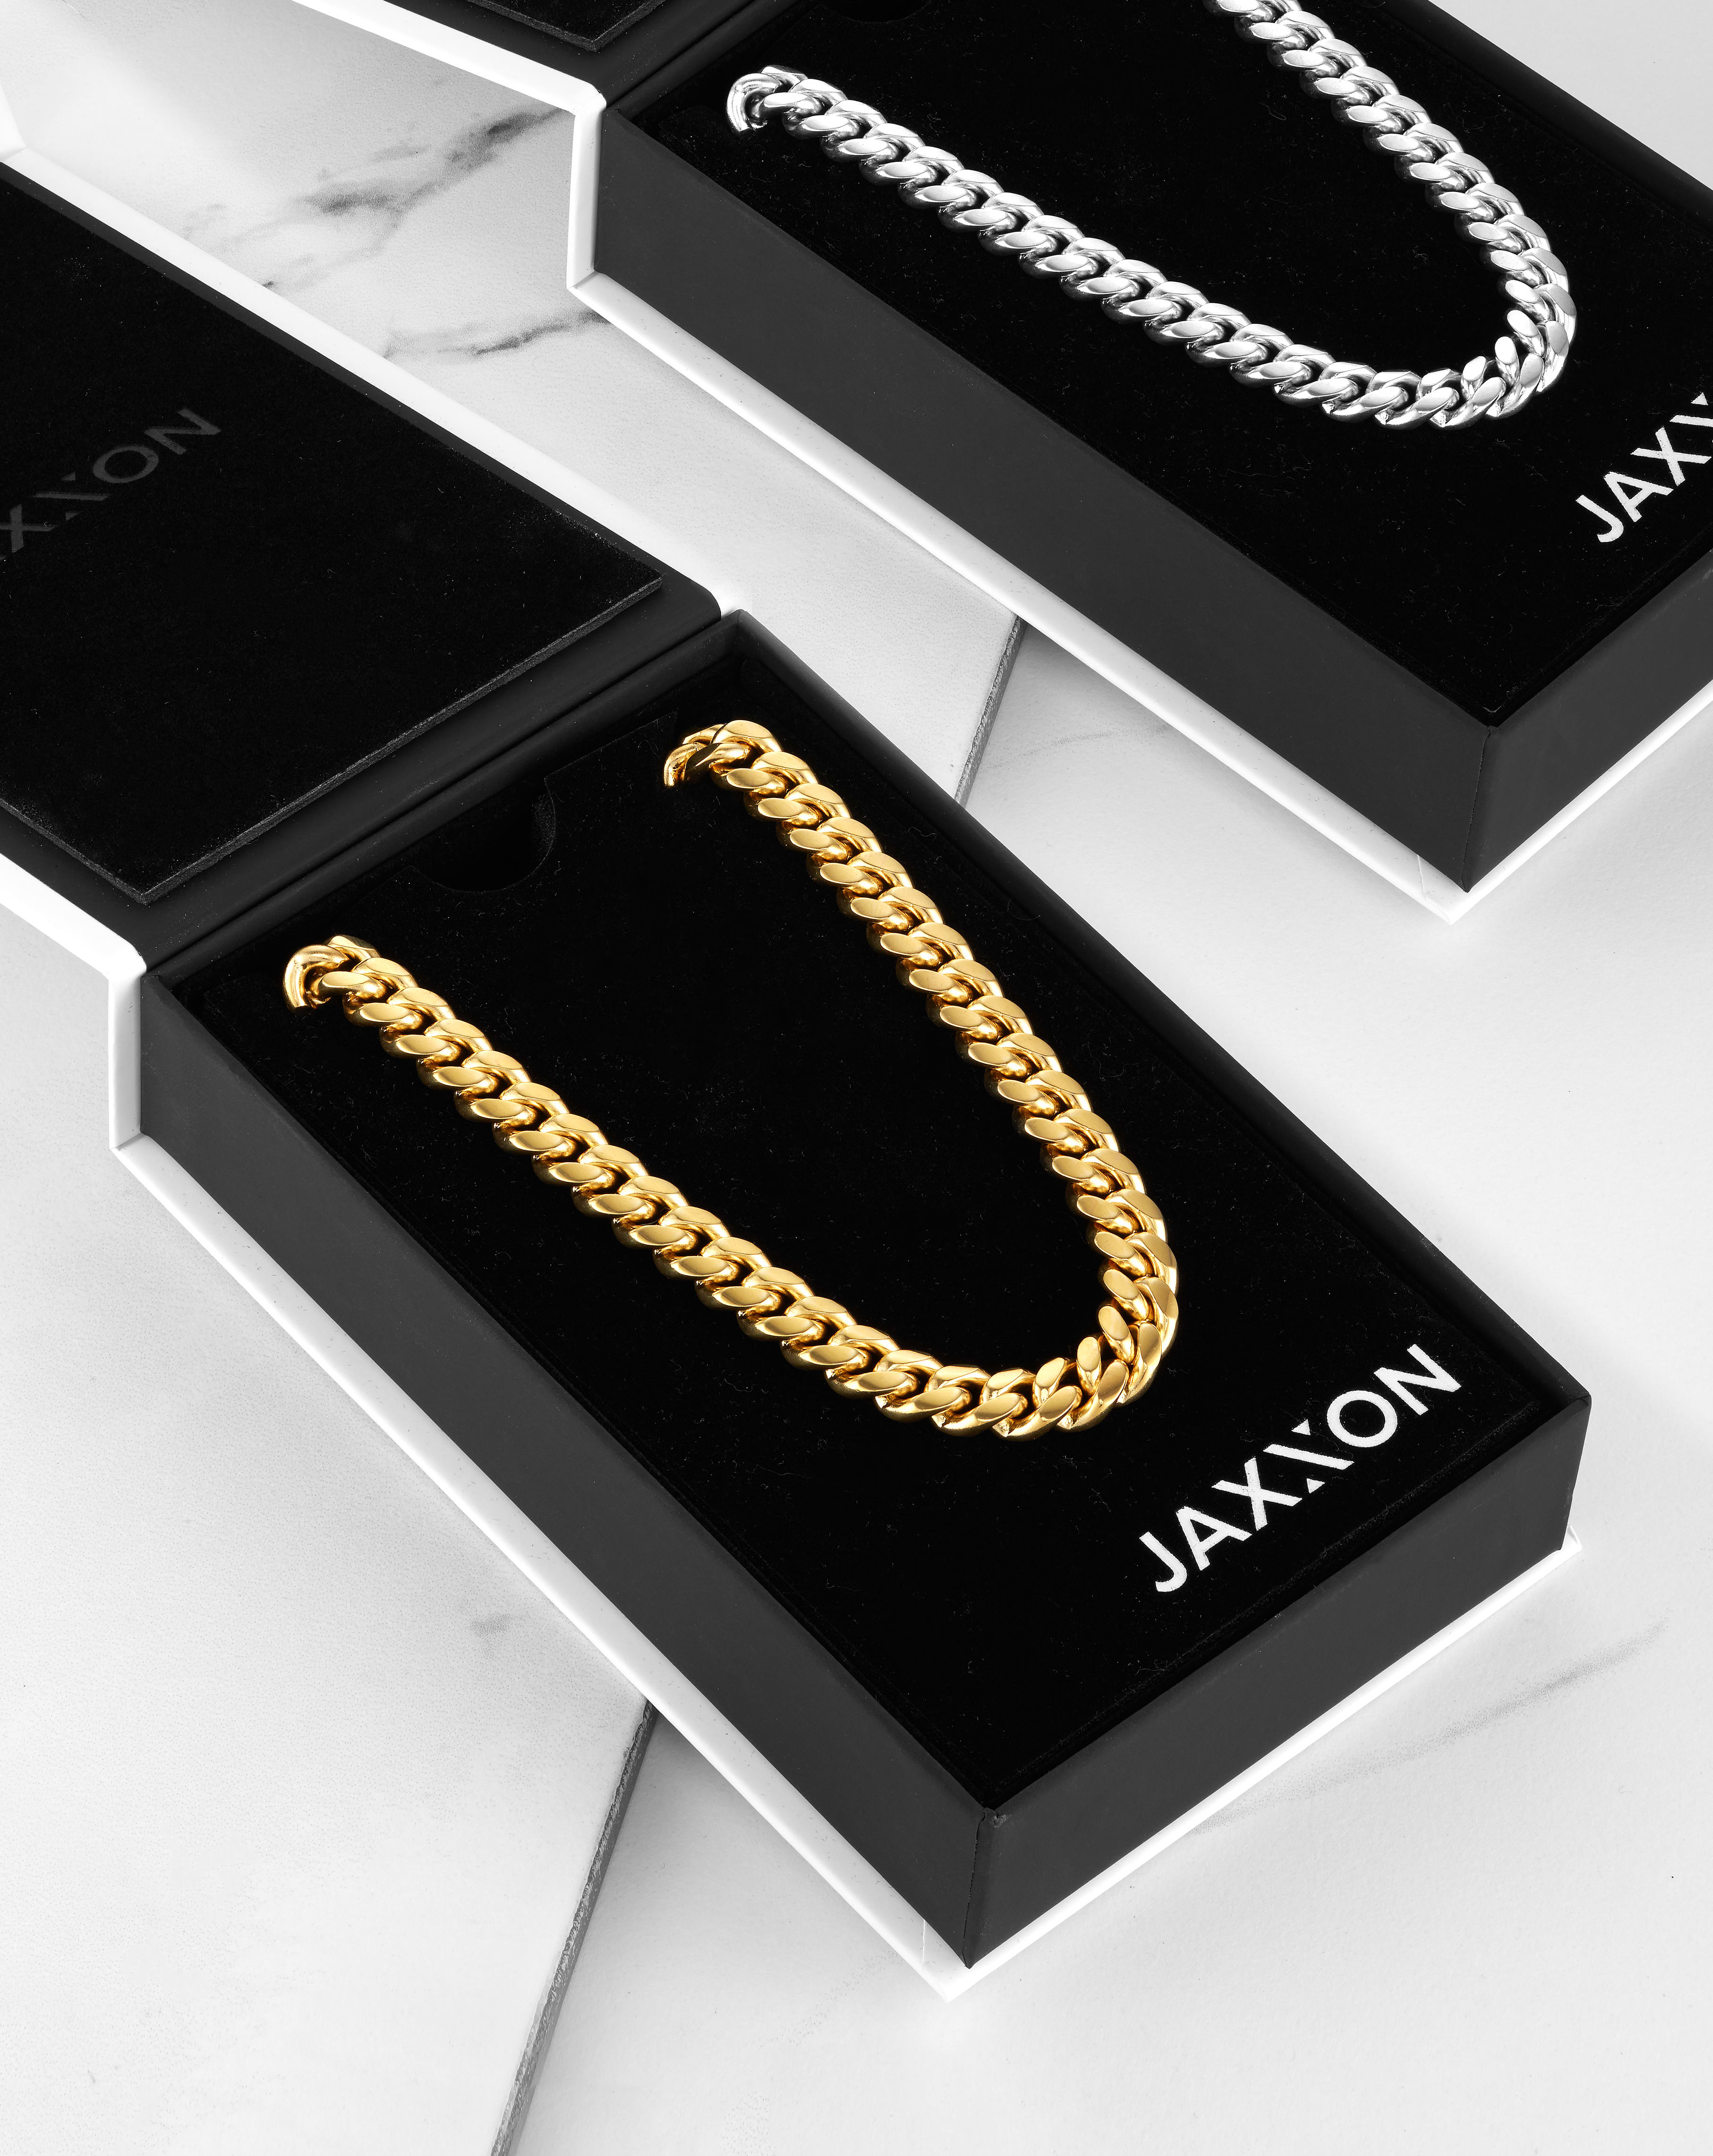 Image Cuban Link Chain - 10mm Gold - Higher Quality Standards